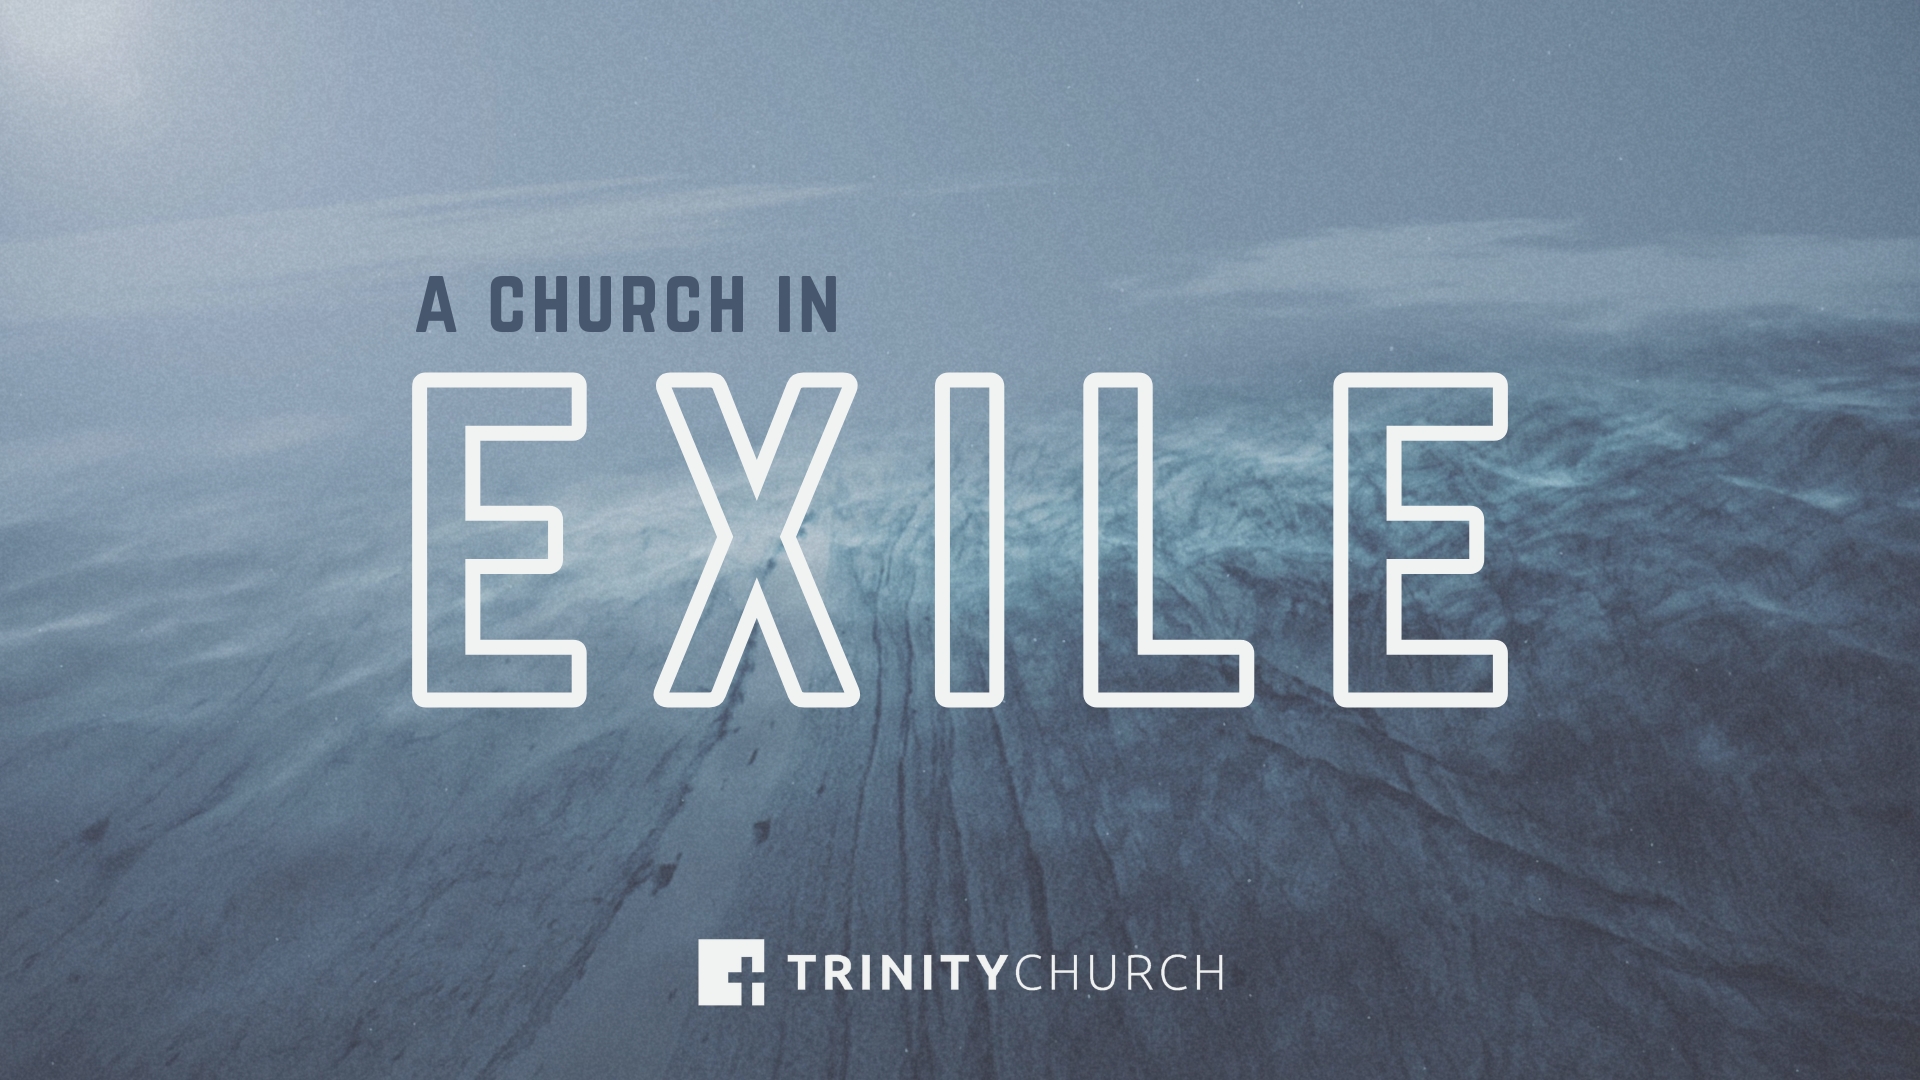 Hope for a Church in Exile